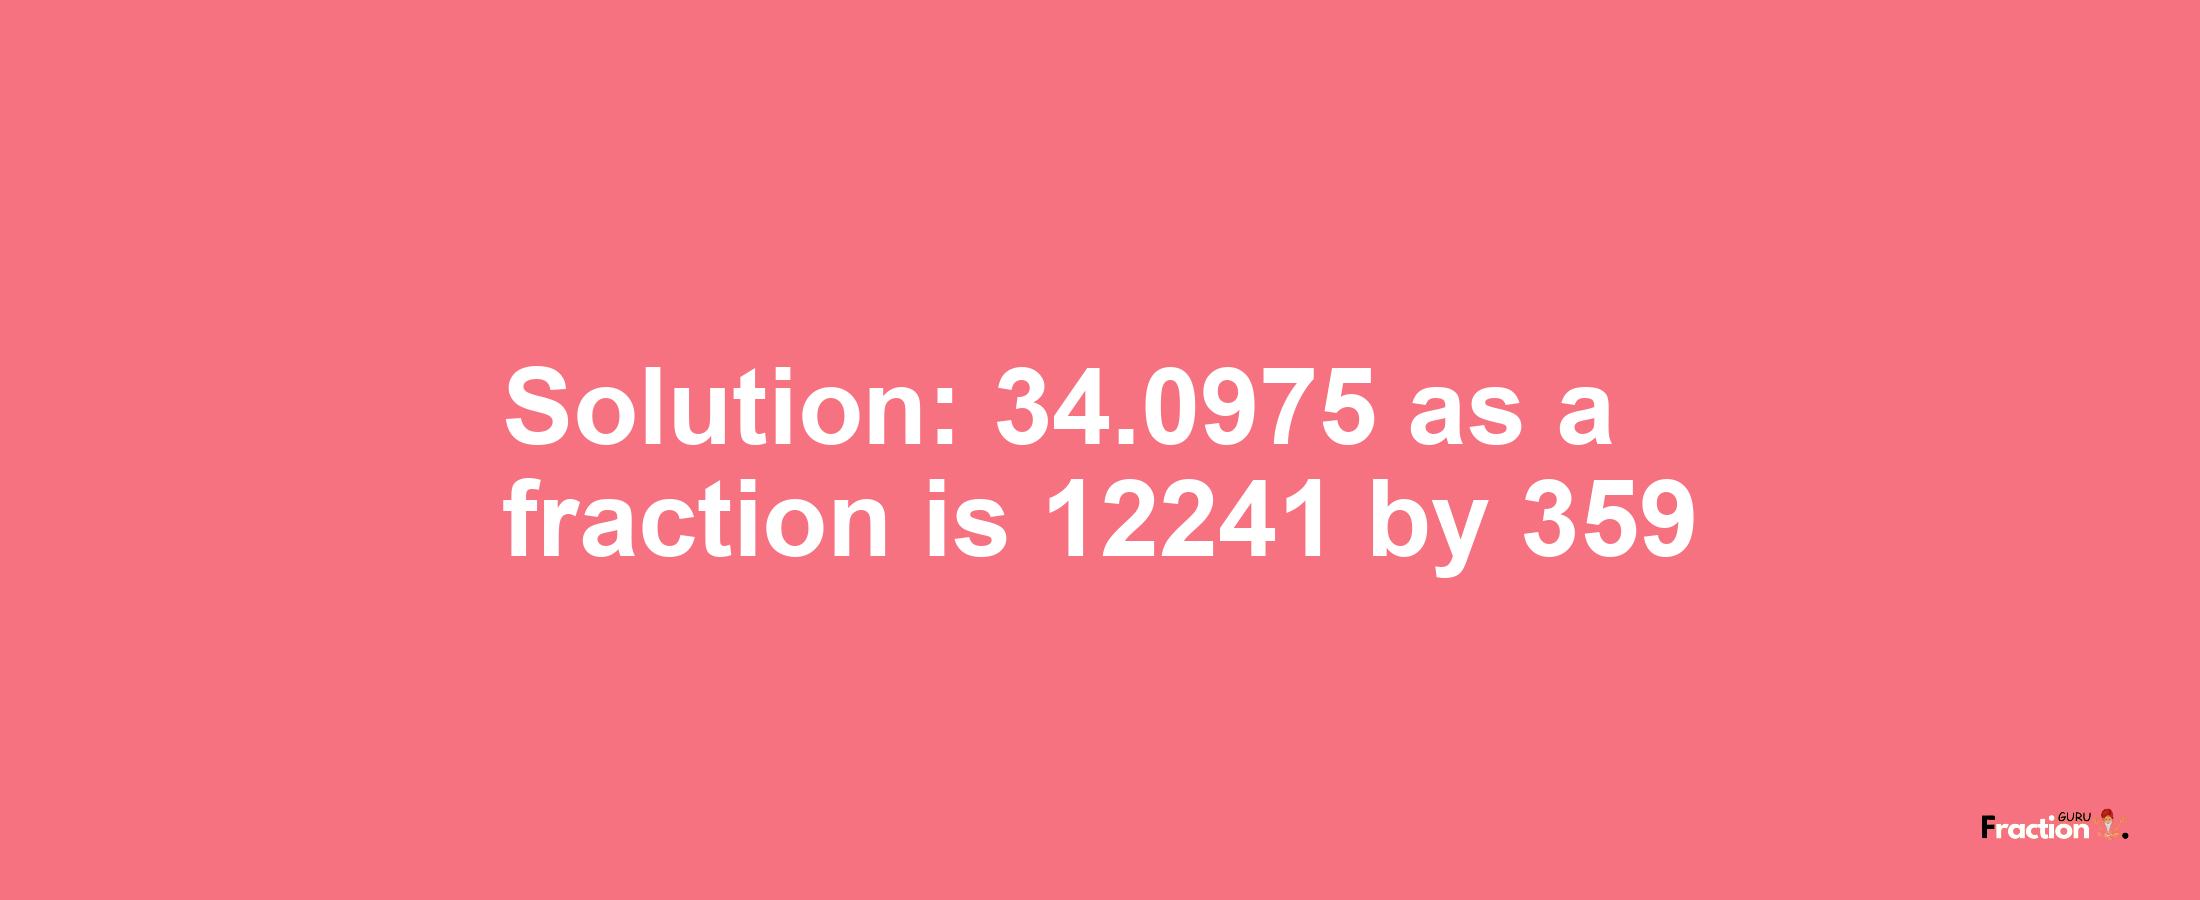 Solution:34.0975 as a fraction is 12241/359